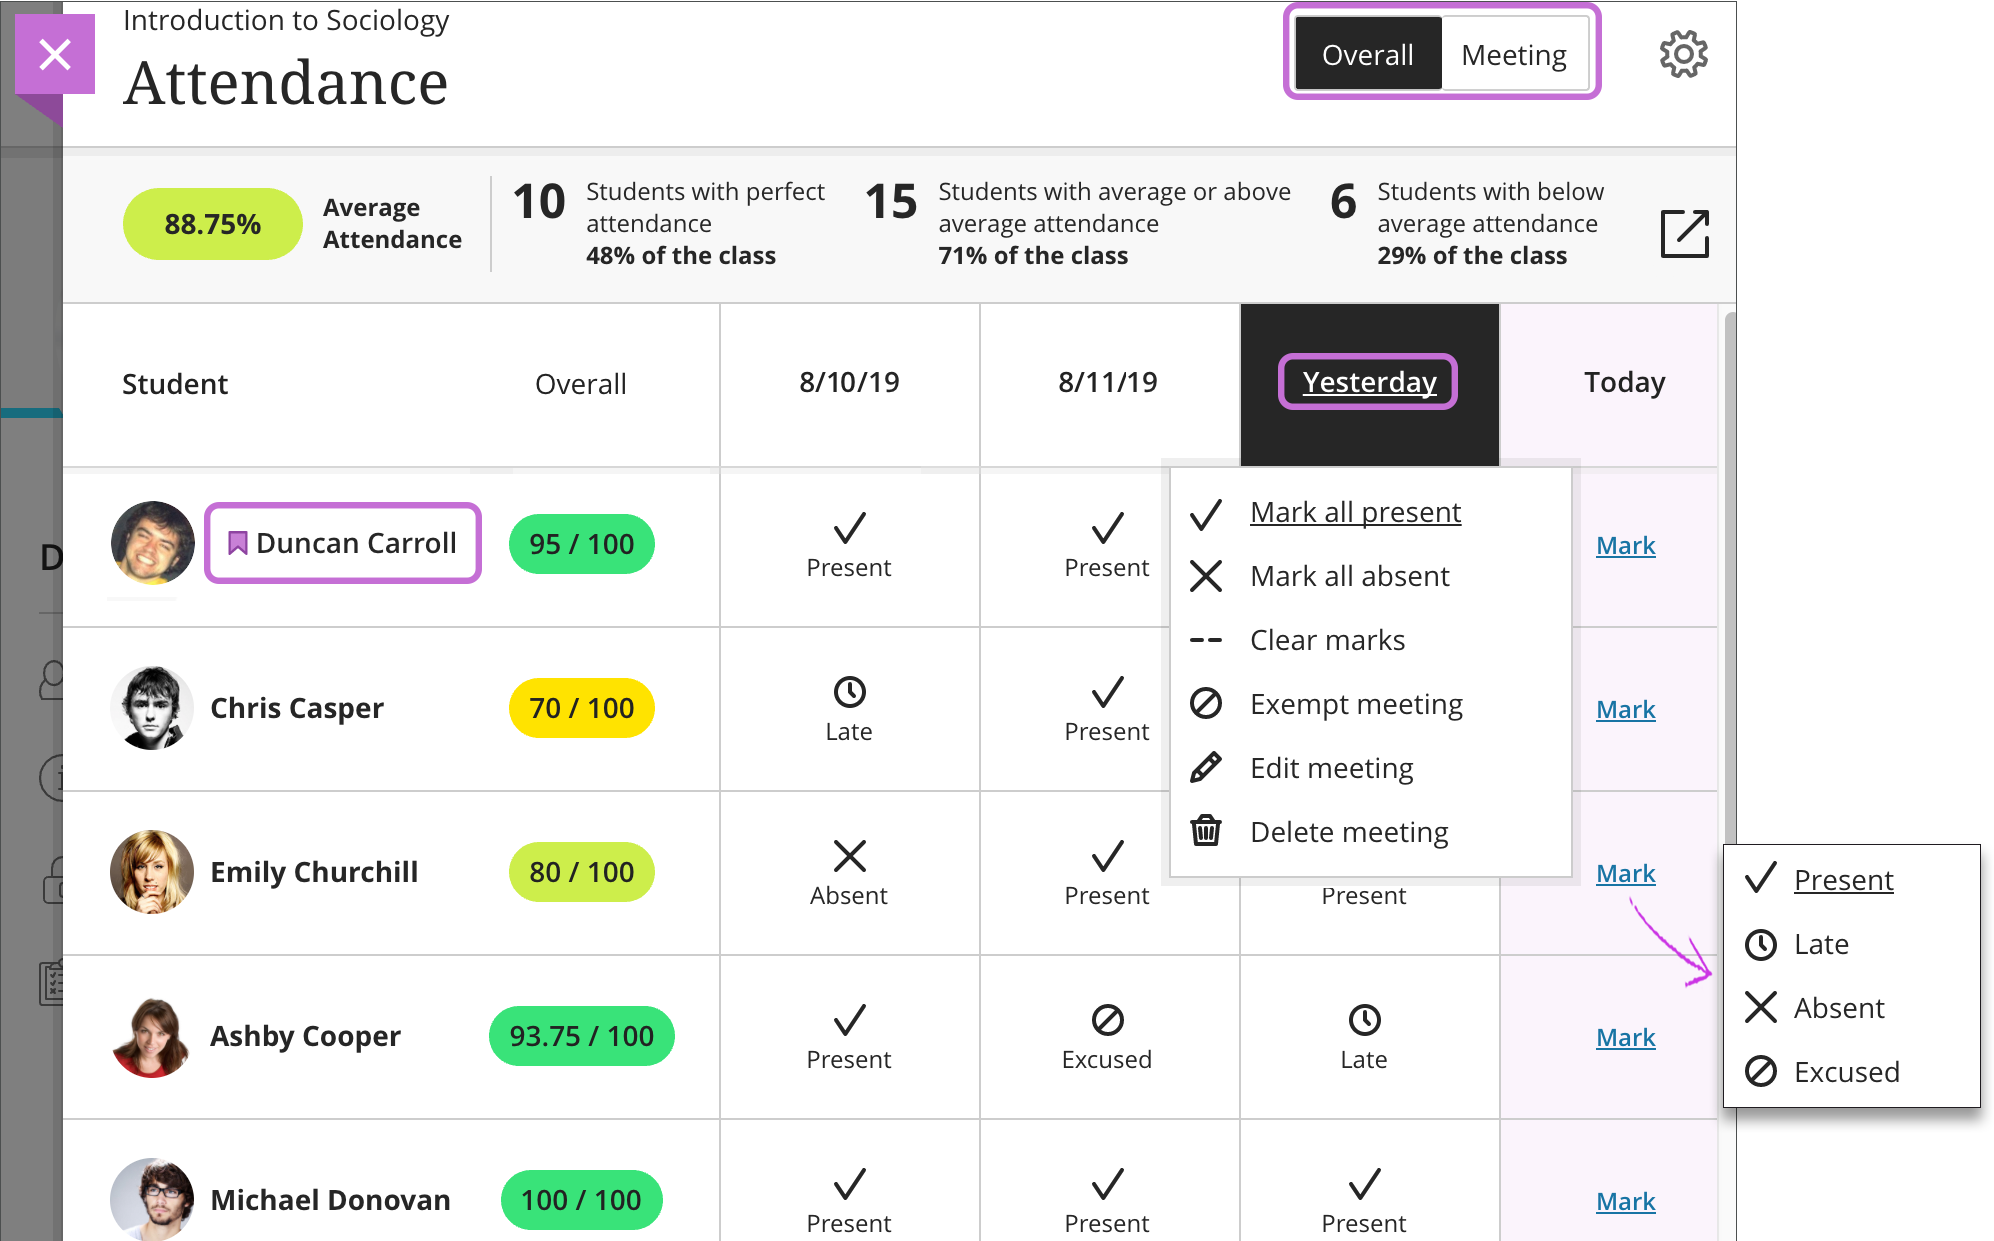 The Attendance page is open with 1) the Overall view selected and highlighted, 2) a column heading selected and highlighted with the "Mark all present" and "Mark all absent" options displayed, 3) a "Saved" icon next to a username highlighted, 4) a "Mark" option selected with the attendance menu displayed.